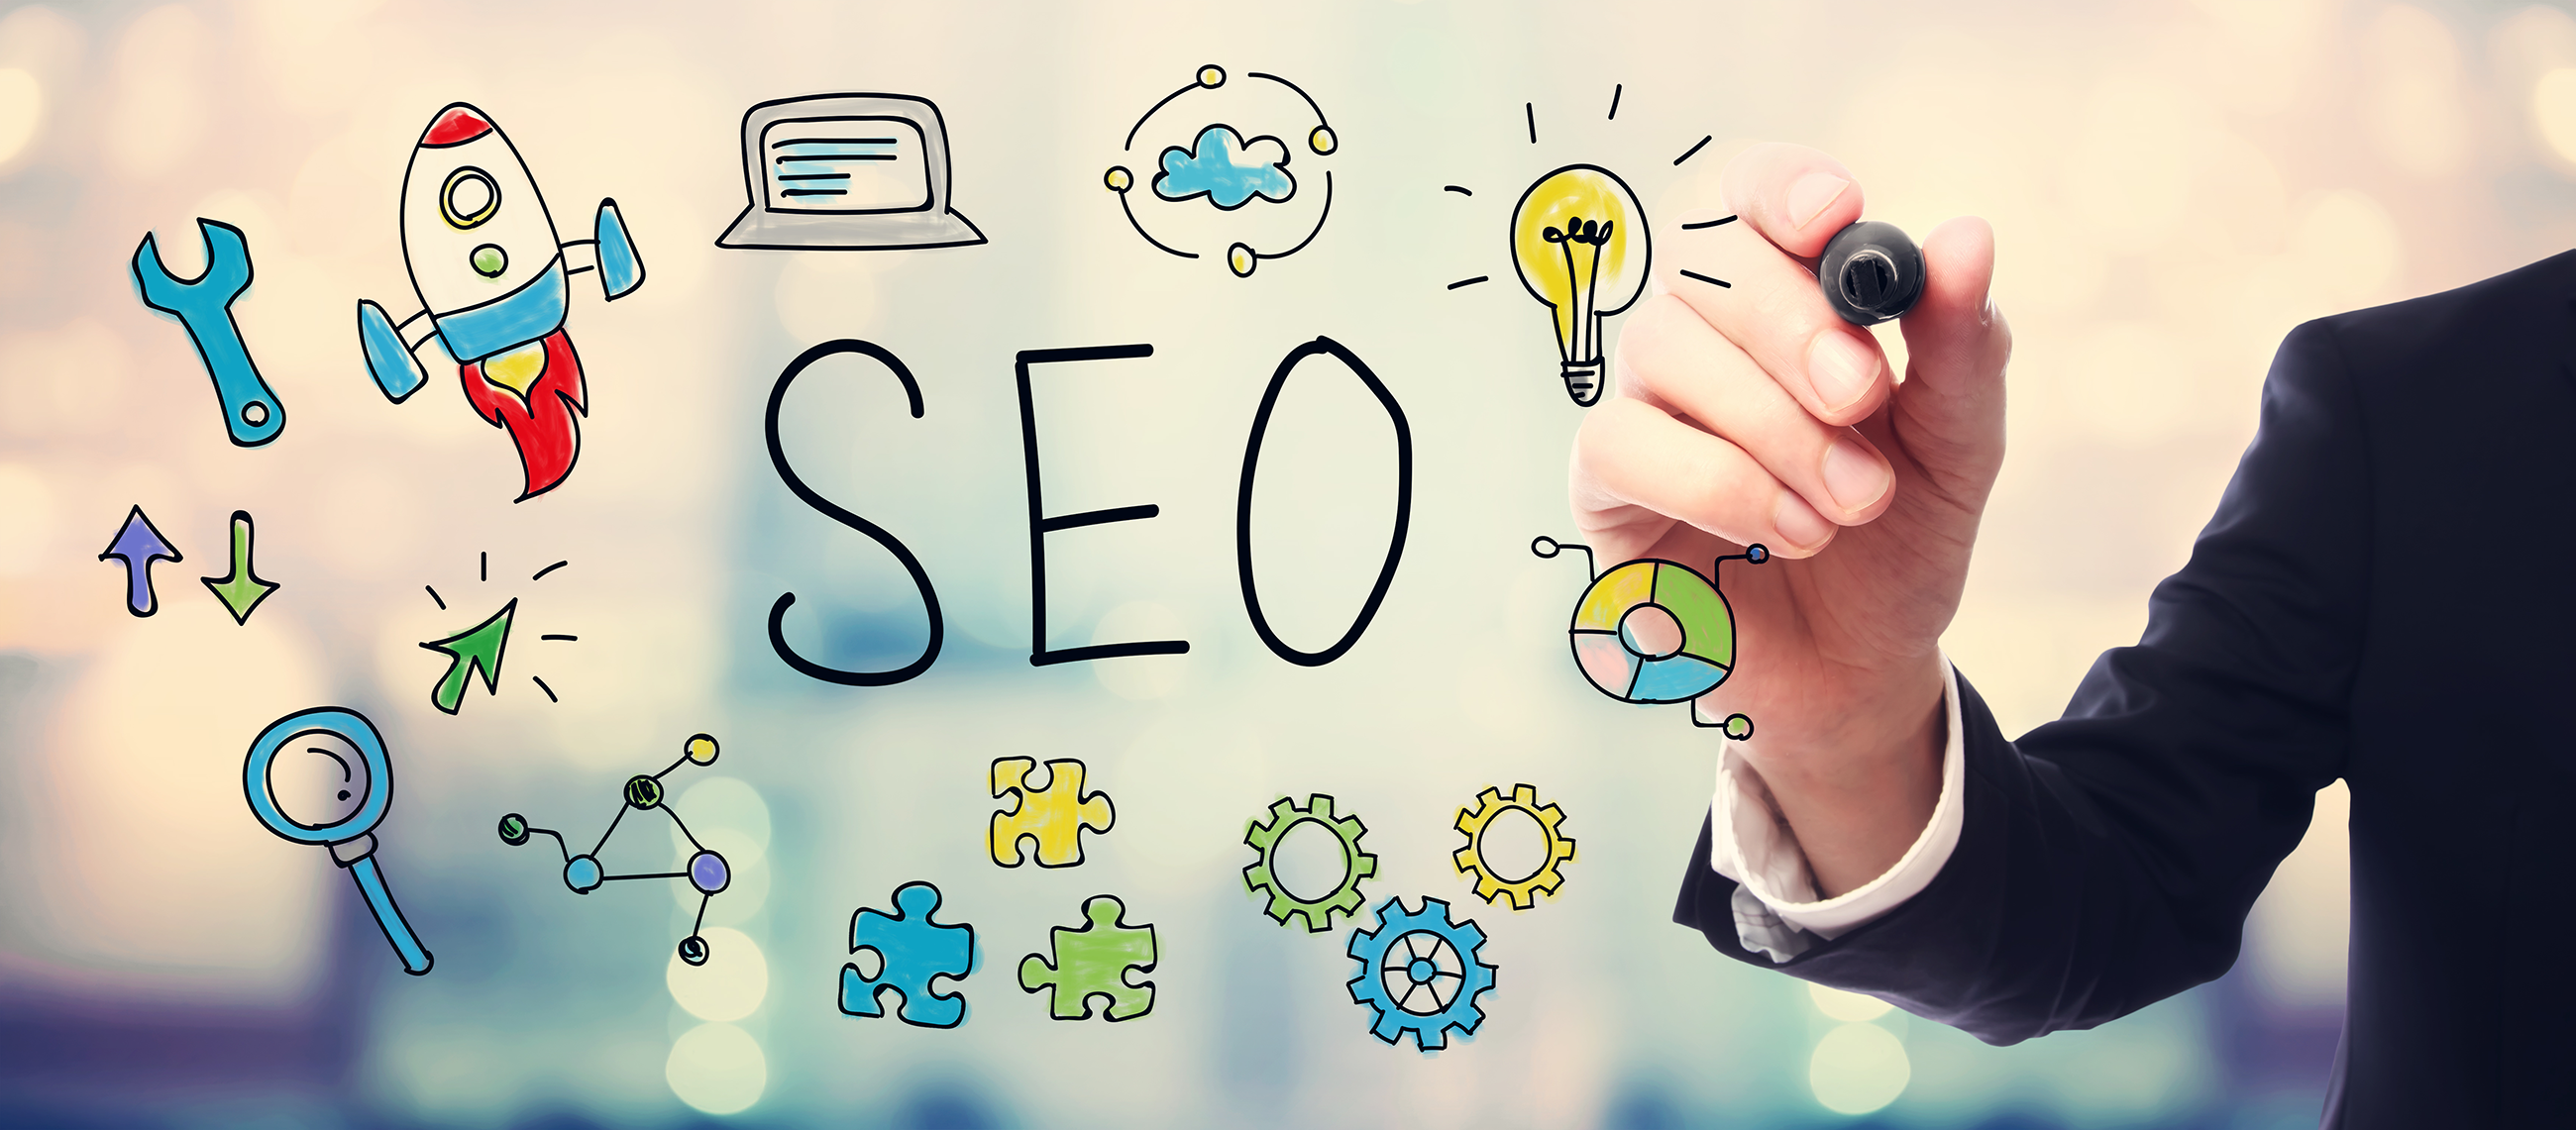 A Quick What And Why Of SEO